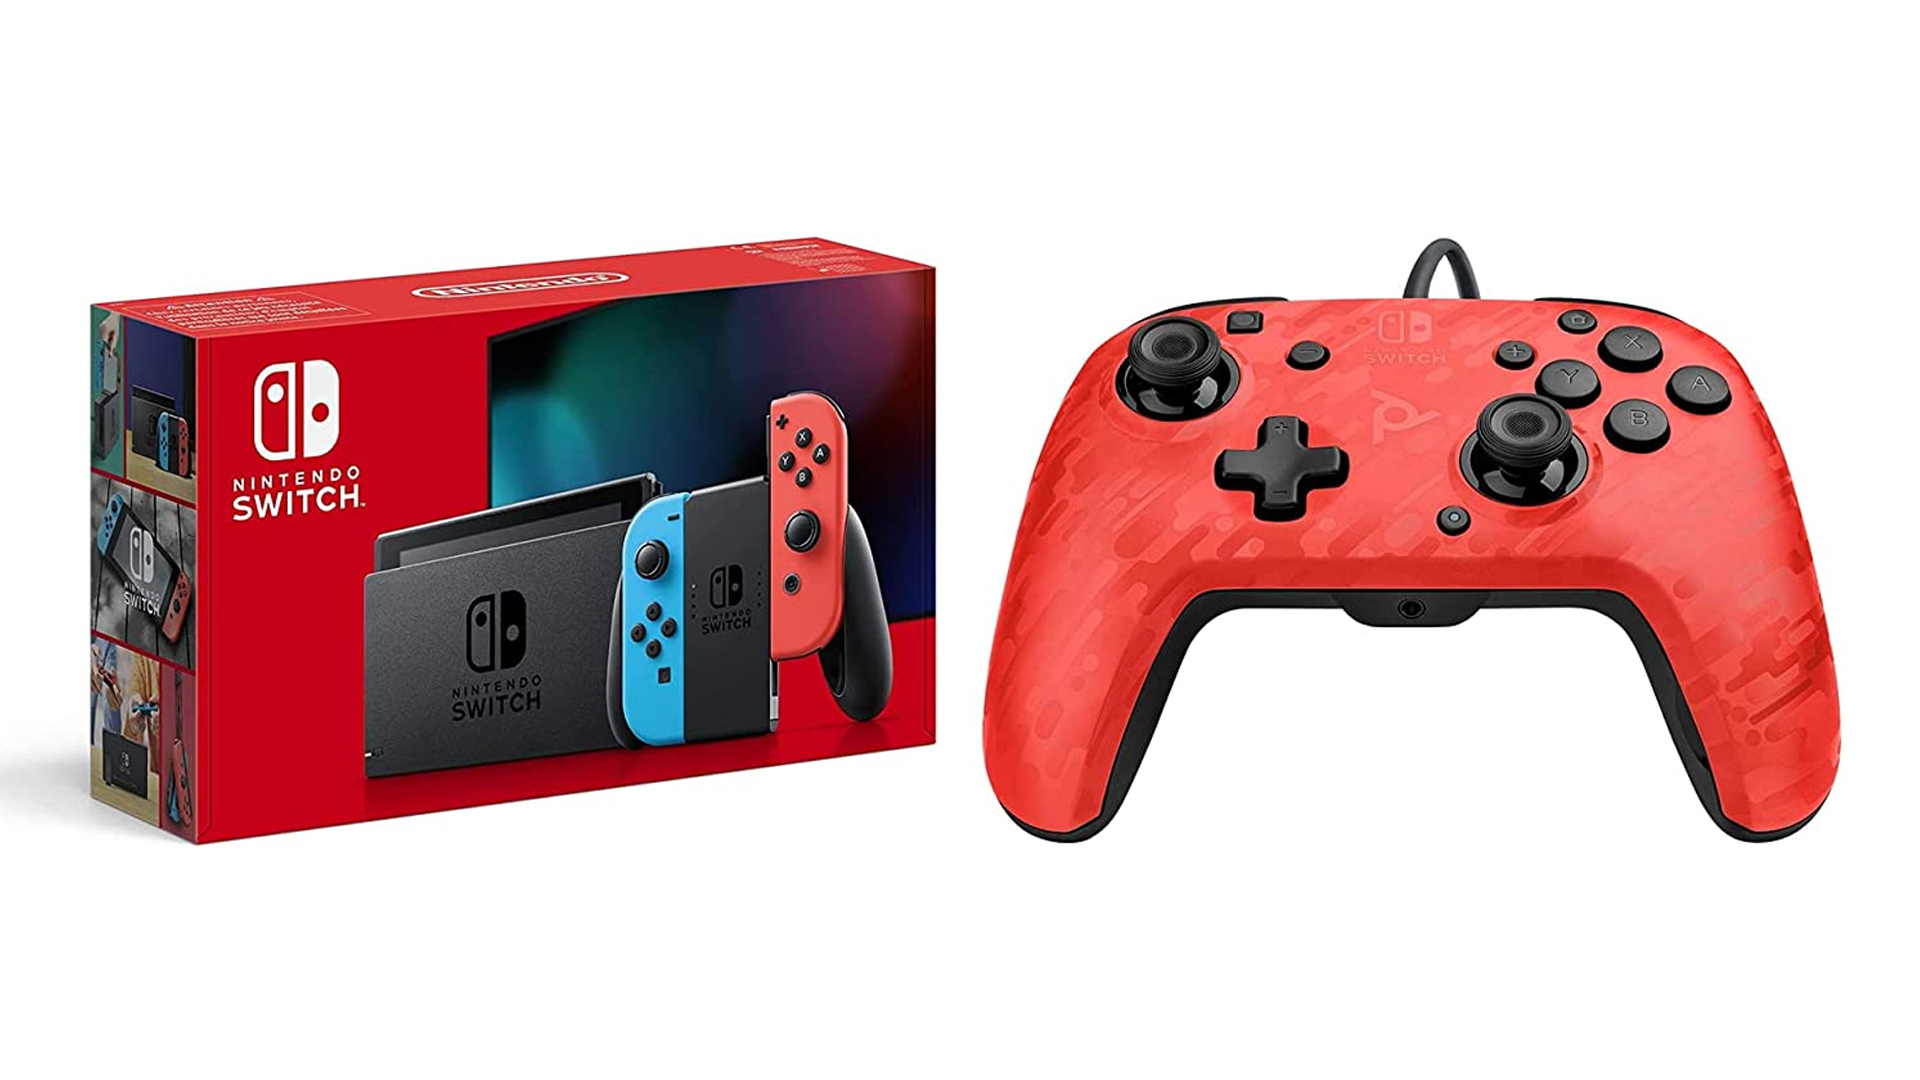 The Nintnedo Switch and controller bundle.